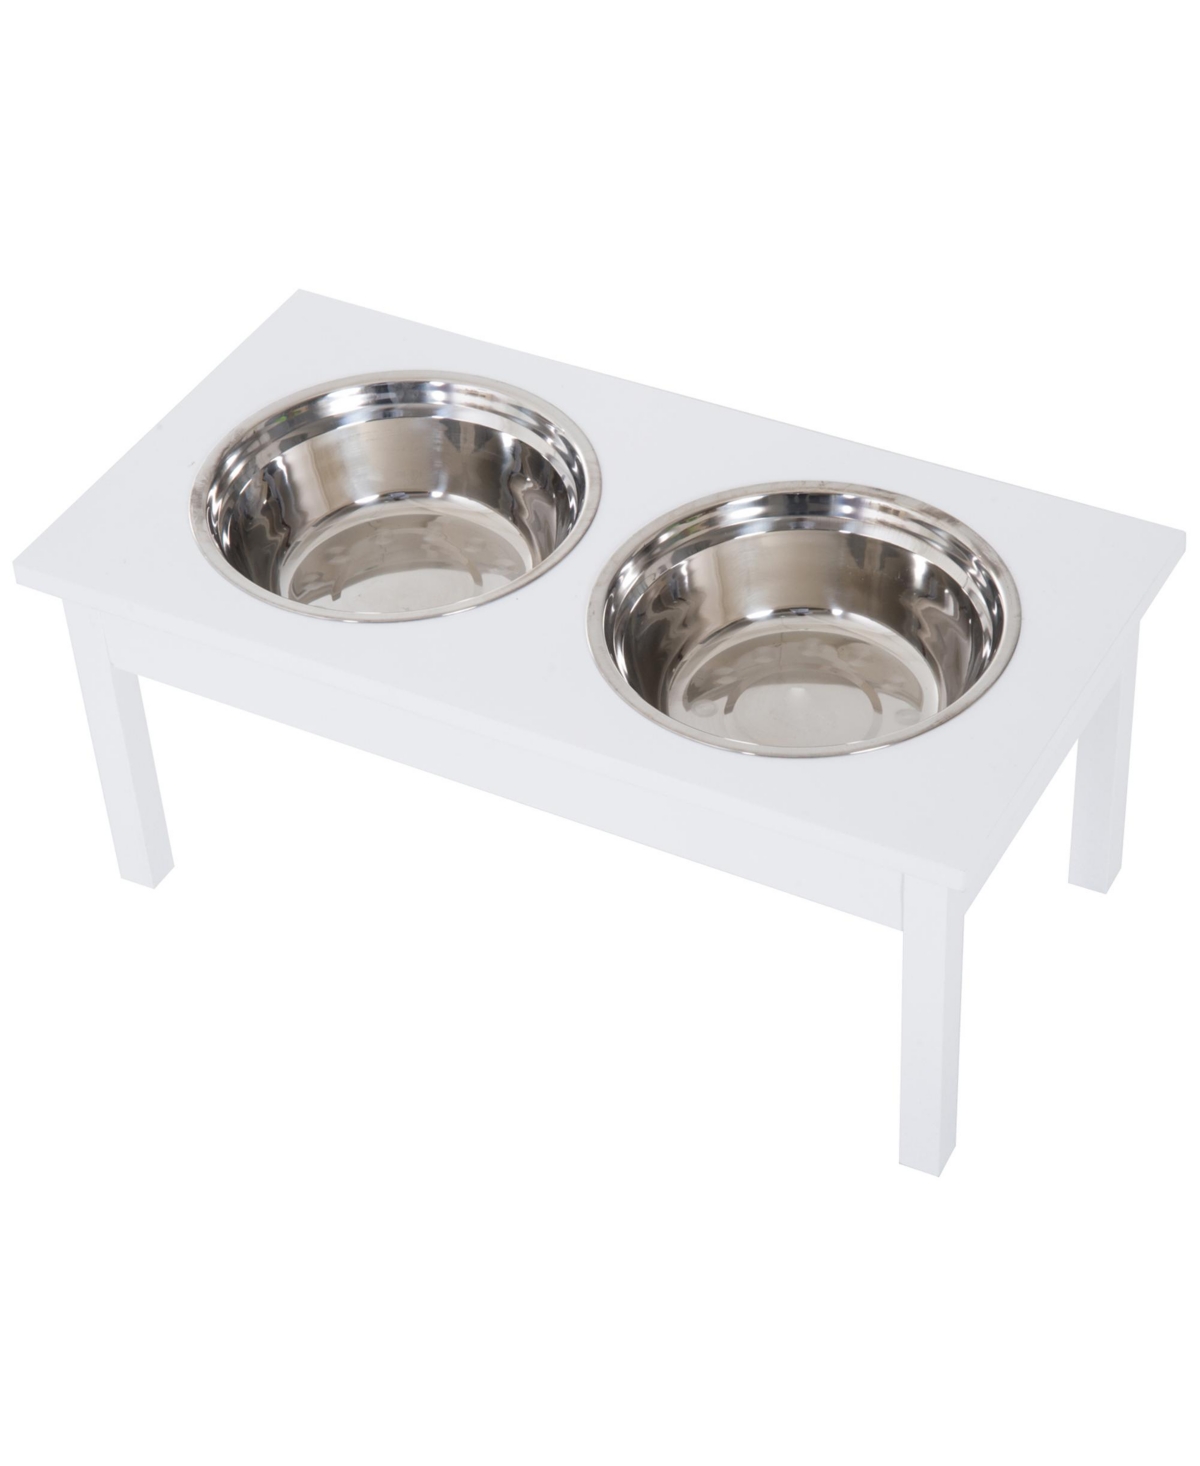 10" Elevated Raised Dog Feeder Stainless Steel Double Bowl Food Water - White